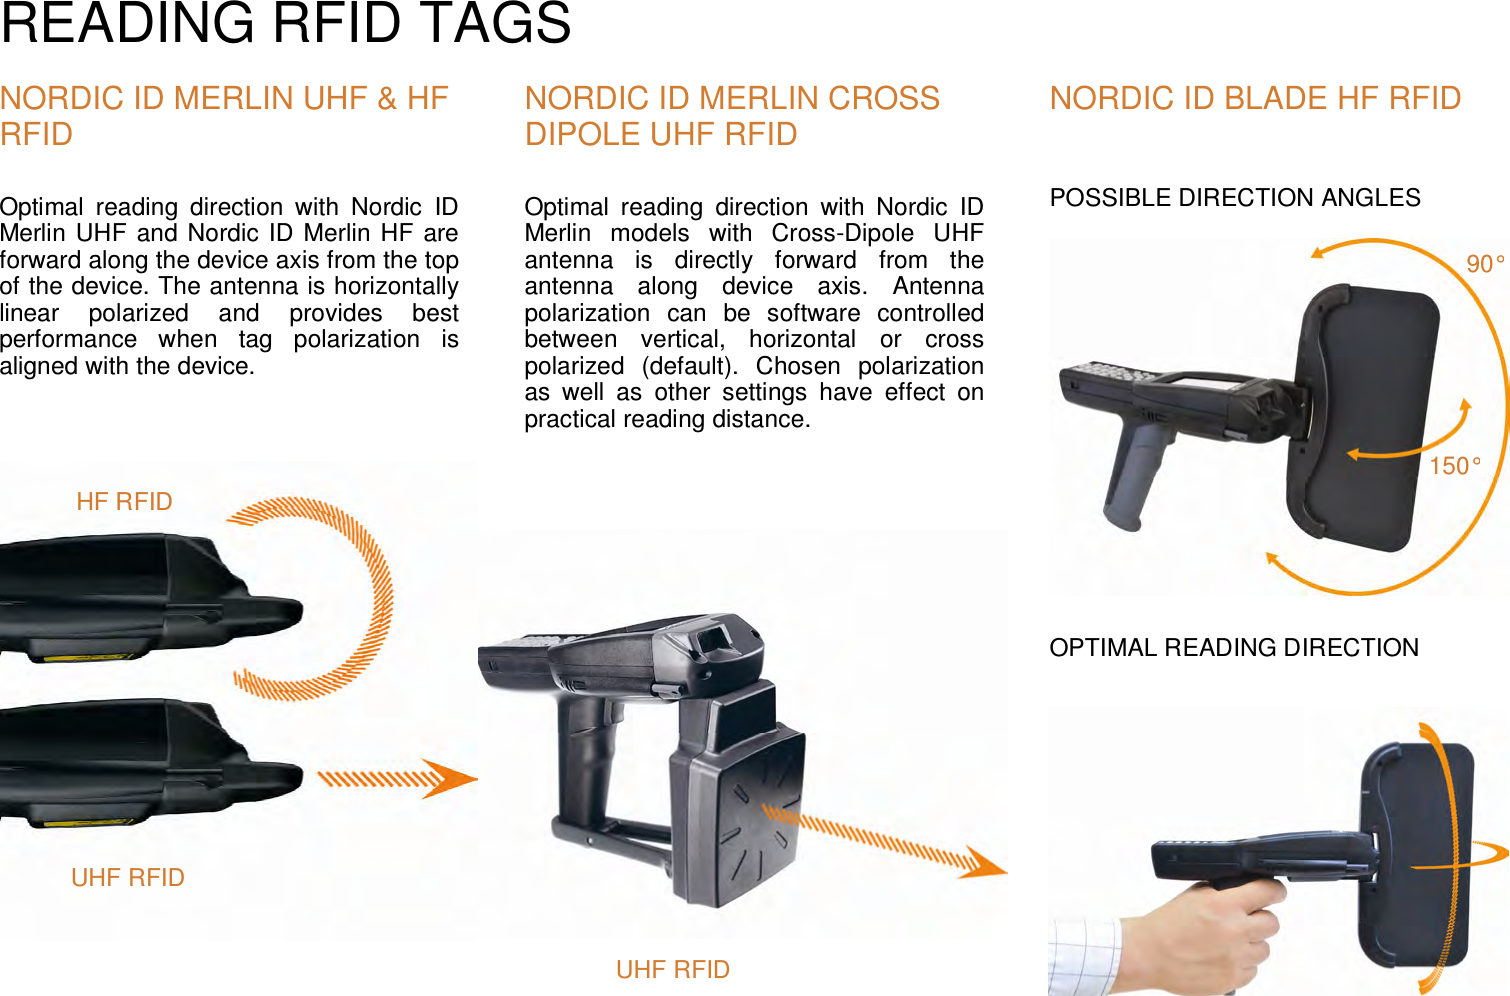 READING RFID TAGS   NORDIC ID MERLIN UHF &amp; HF RFID Optimal  reading  direction  with  Nordic  ID Merlin UHF  and Nordic ID Merlin HF are forward along the device axis from the top of the device. The antenna is horizontally linear  polarized  and  provides  best performance  when  tag  polarization  is aligned with the device.       NORDIC ID MERLIN CROSS DIPOLE UHF RFID Optimal  reading  direction  with  Nordic  ID Merlin  models  with  Cross-Dipole  UHF antenna  is  directly  forward  from  the antenna  along  device  axis.  Antenna polarization  can  be  software  controlled between  vertical,  horizontal  or  cross polarized  (default).  Chosen  polarization as  well  as  other  settings  have  effect  on practical reading distance.      NORDIC ID BLADE HF RFID   POSSIBLE DIRECTION ANGLES                 OPTIMAL READING DIRECTION  UHF RFID HF RFID UHF RFID 150° 90° 